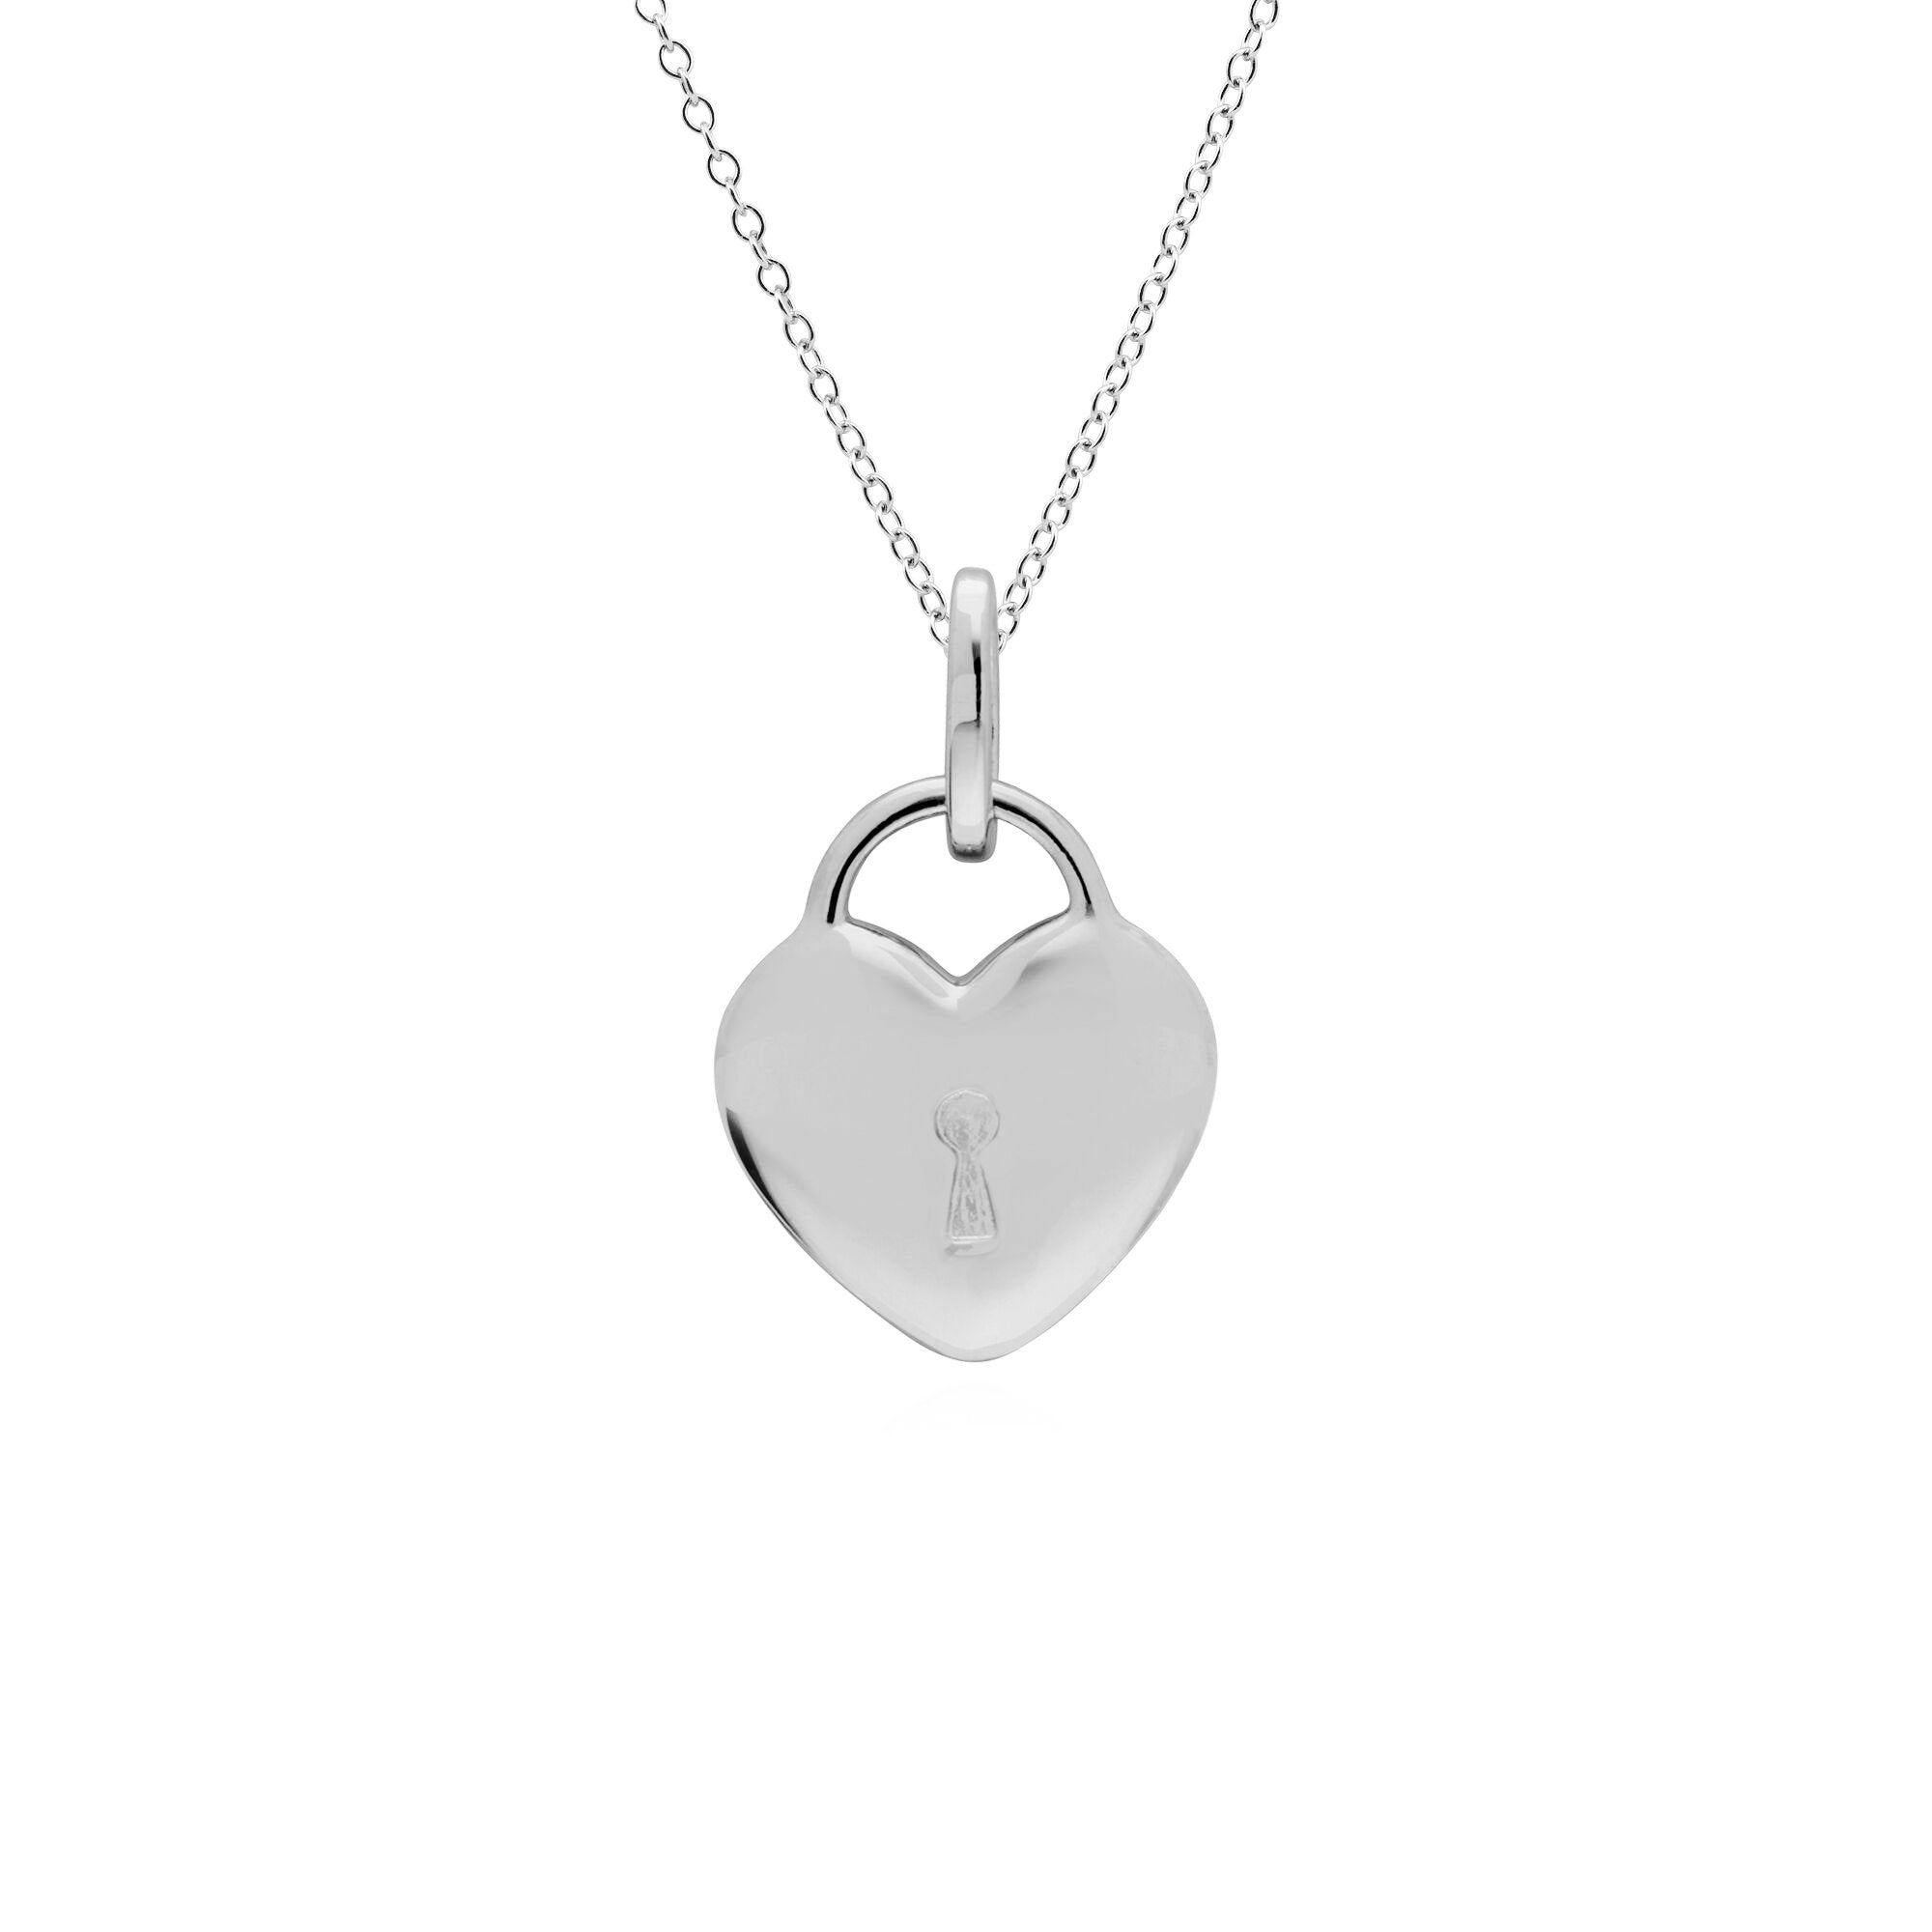 Classic Silver Plain Heart Padlock Charm Pendant in 925 Sterling Silver